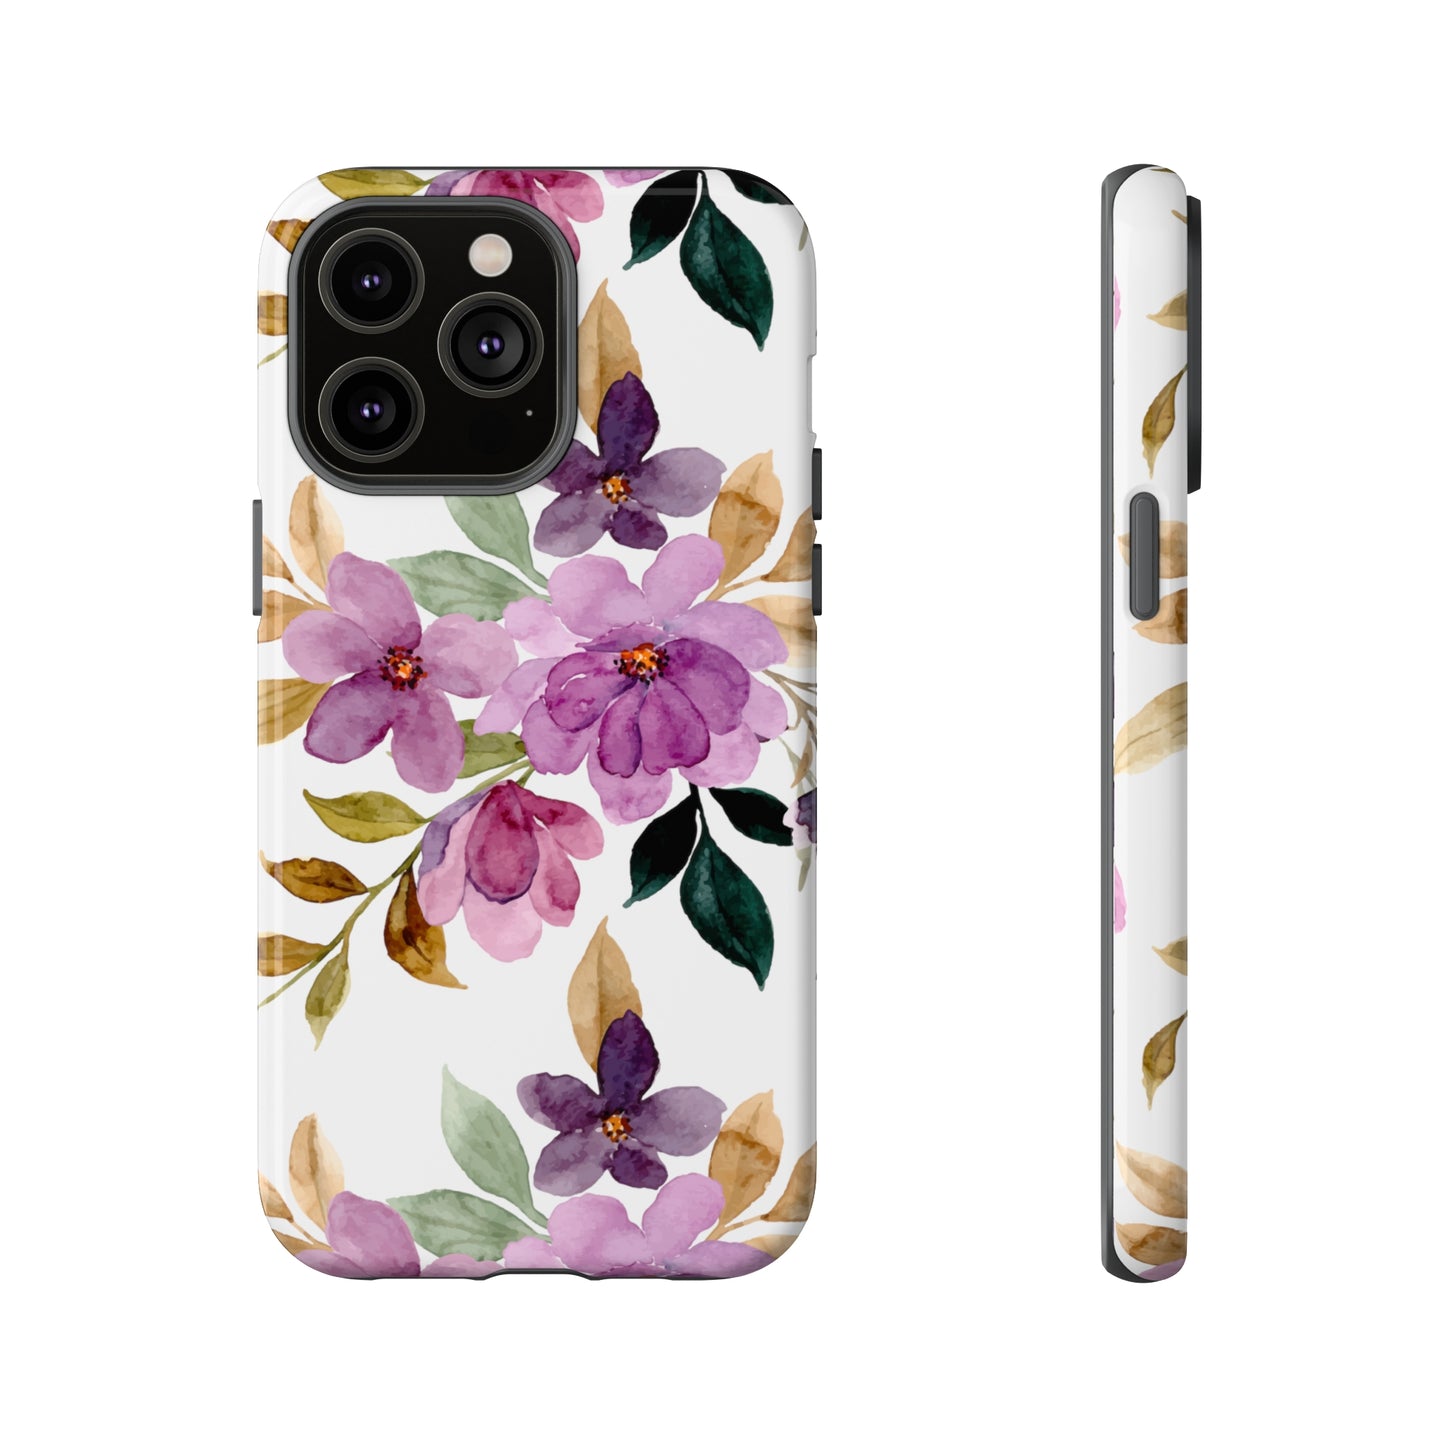 Floral Phone case fits iPhone Samsung Galaxy Google Pixel